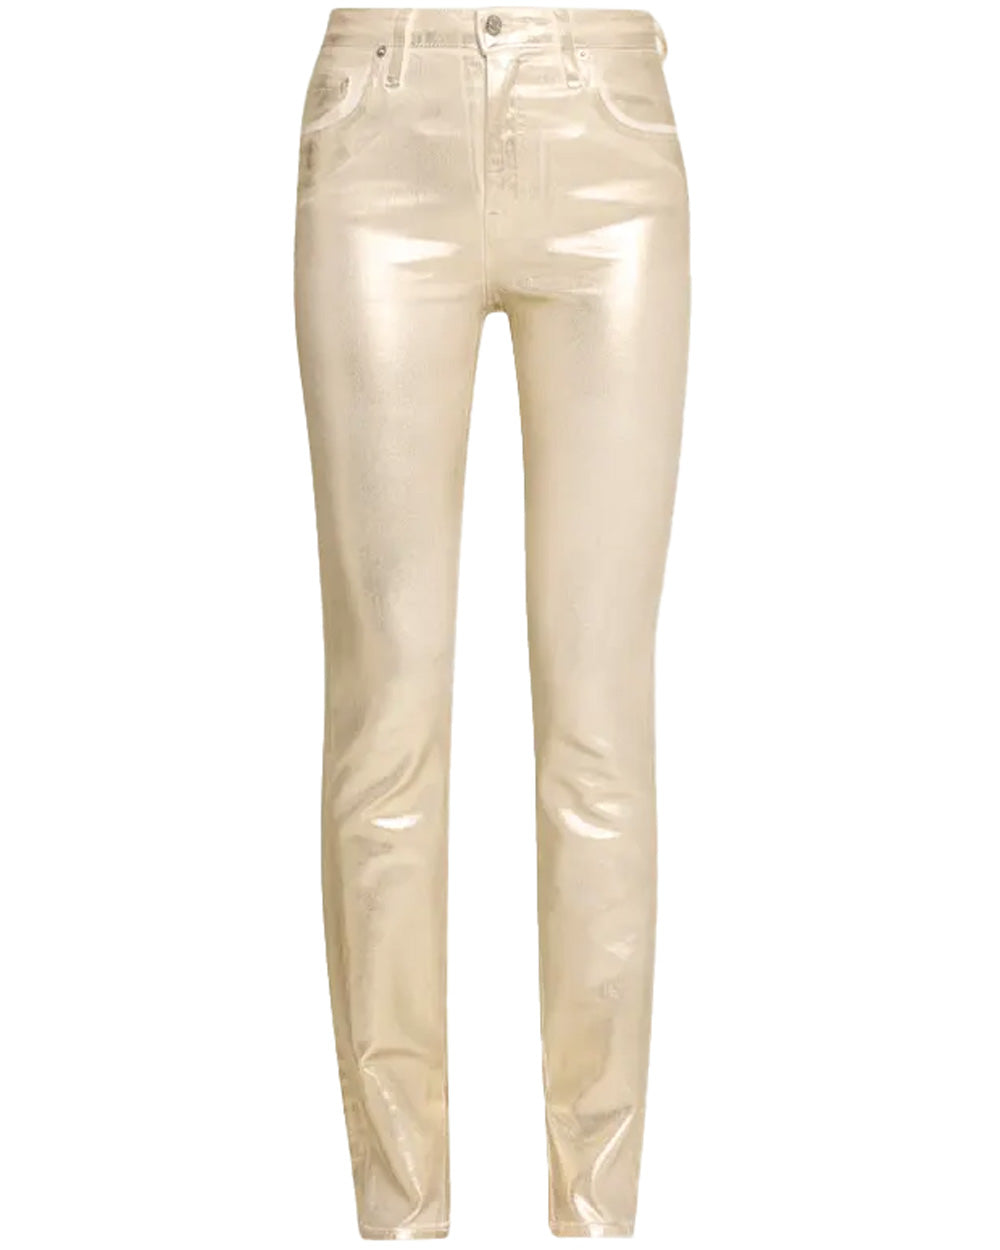 Rae High Rise Ankle Skinny Jean in Gold Foil